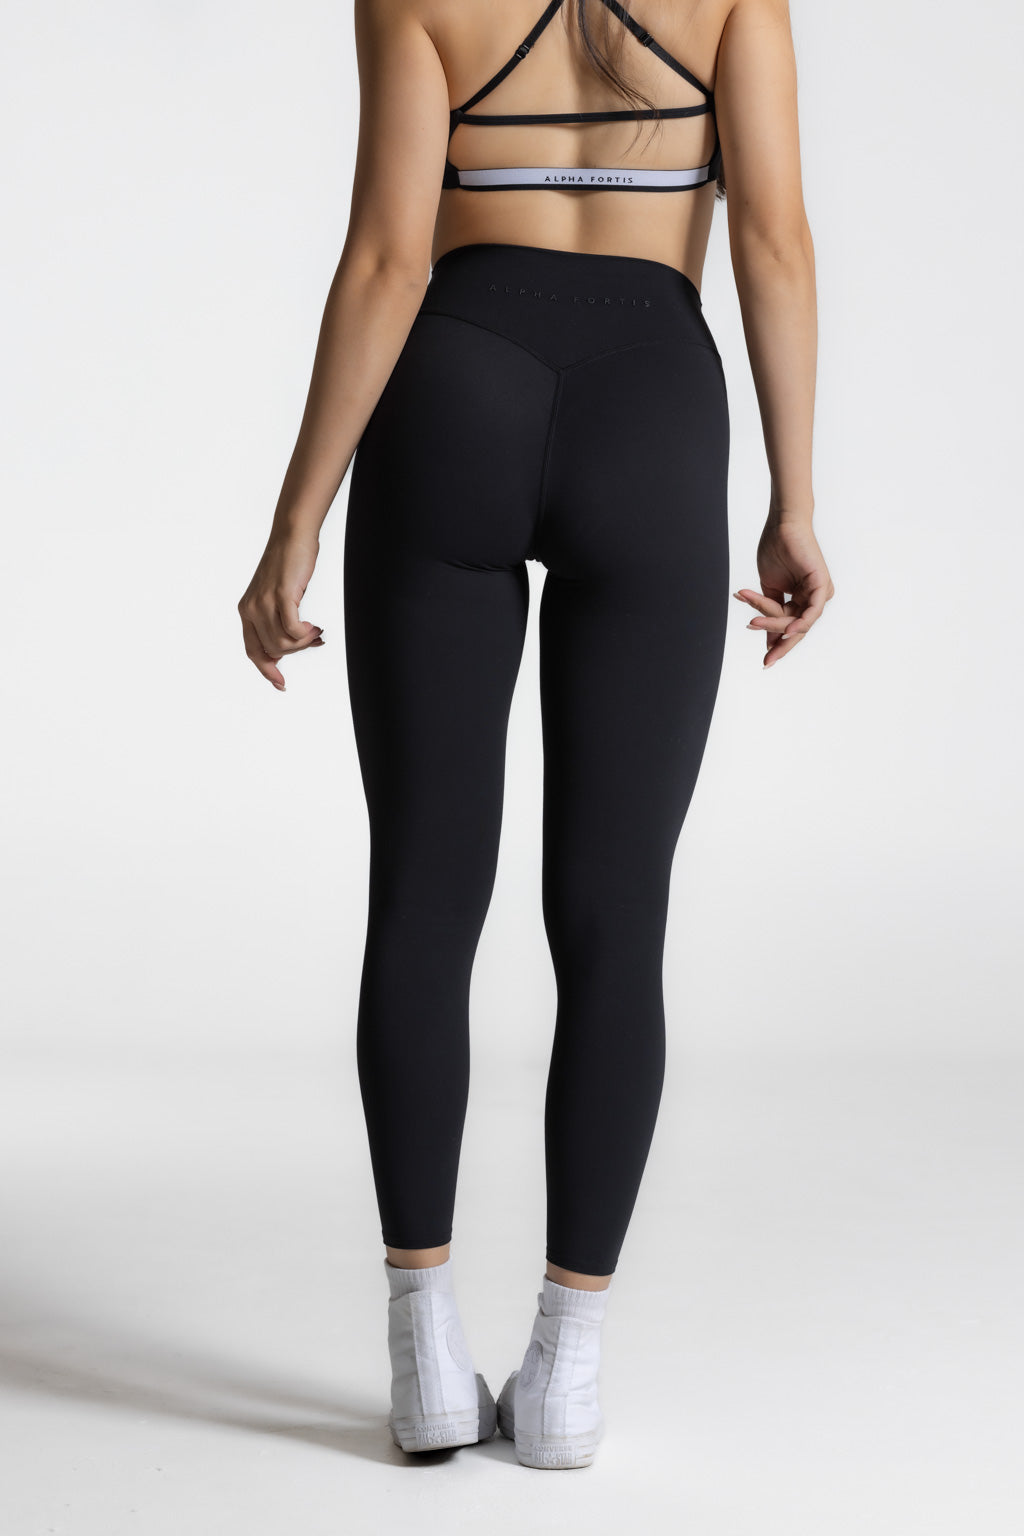 Base Tights Black by Alpha Fortis Streetwear